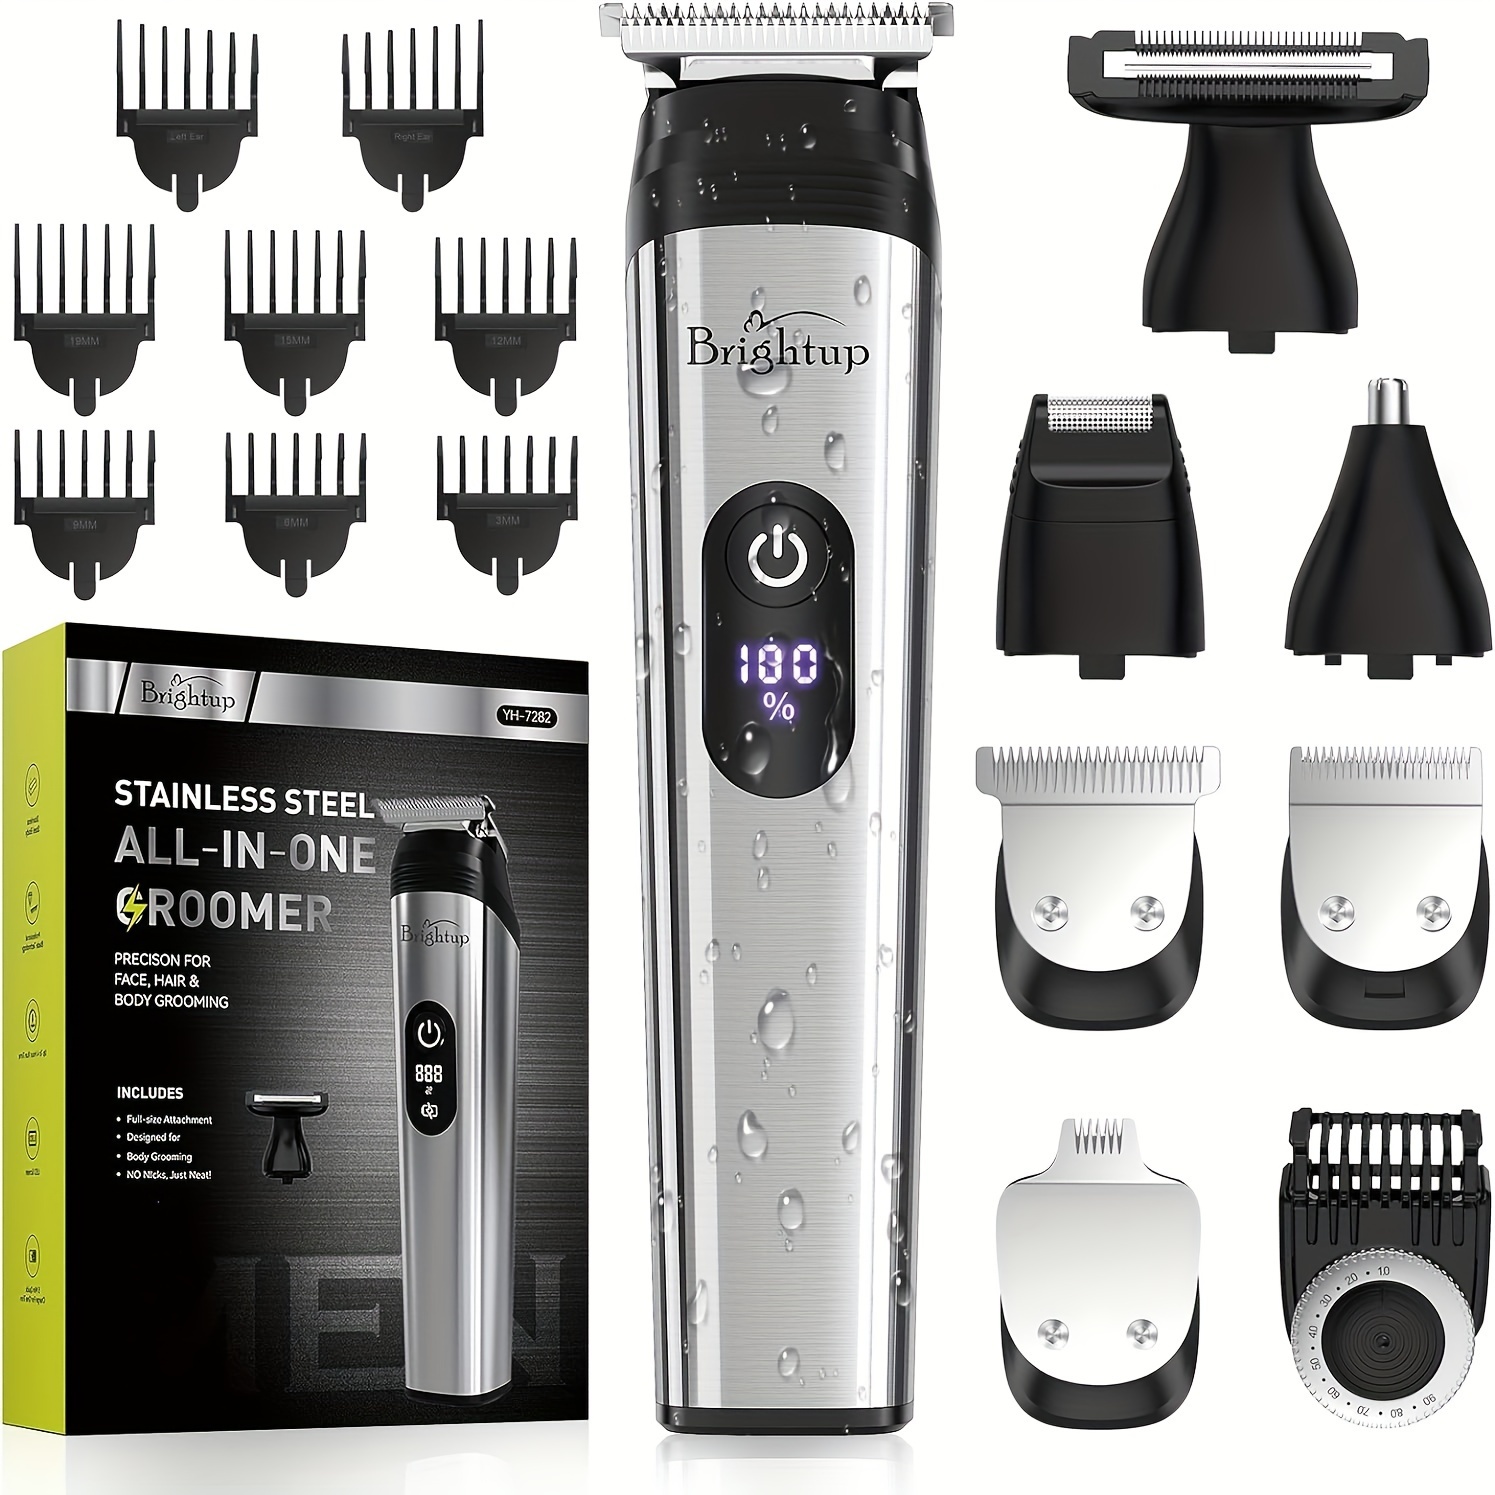 

Stainless Steel Beard Trimmer For Men, 6-in-1 All-in-one Groomer, Waterproof Multi-functional Hair Clippers With Usb Charging, Precision Attachments And Comb Guards, Model Yp-7282